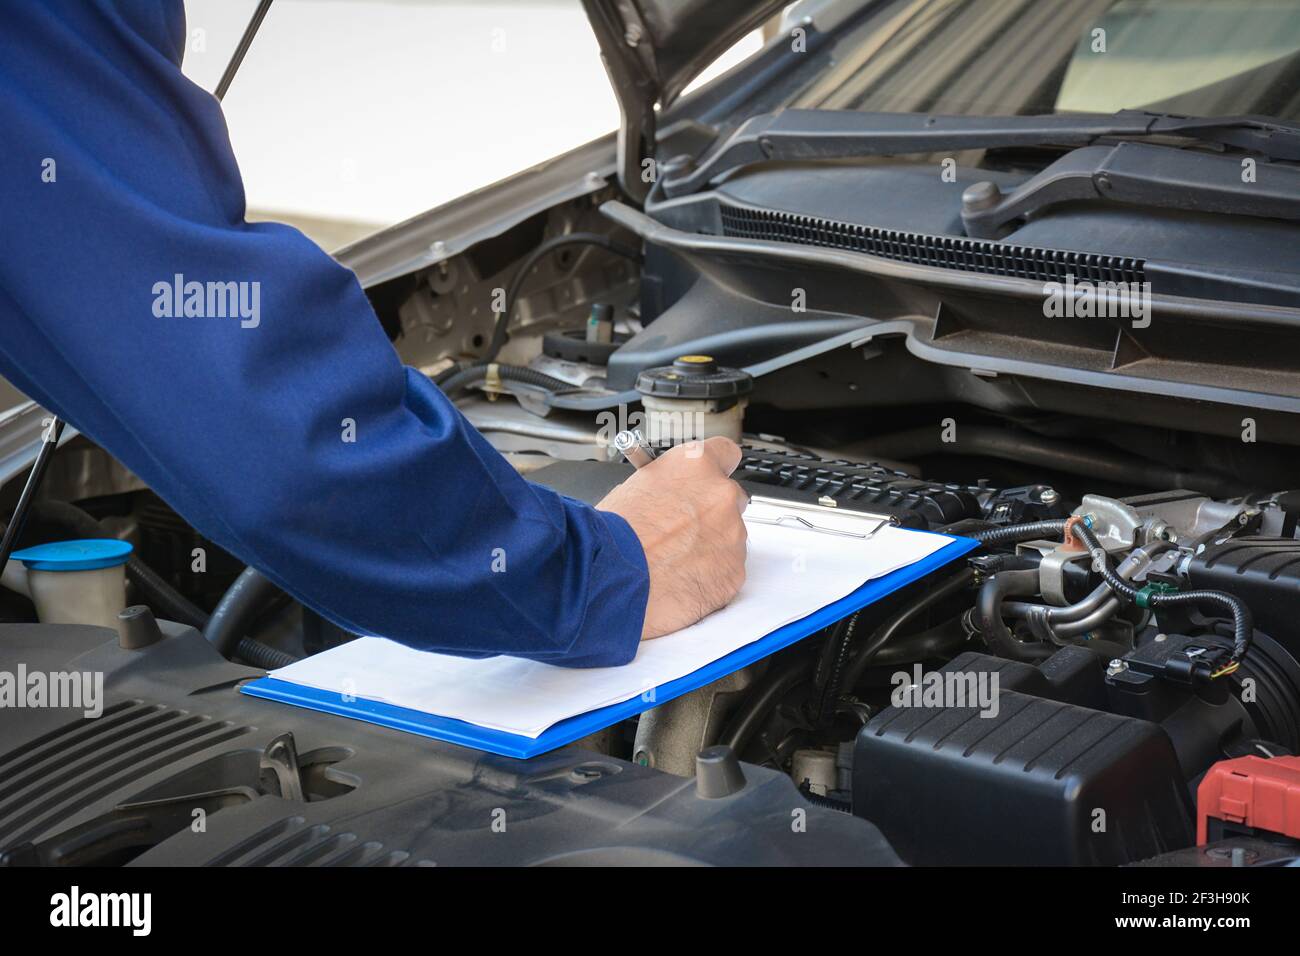 Auto mechanic (or technician) checking car engine at the garage Stock Photo